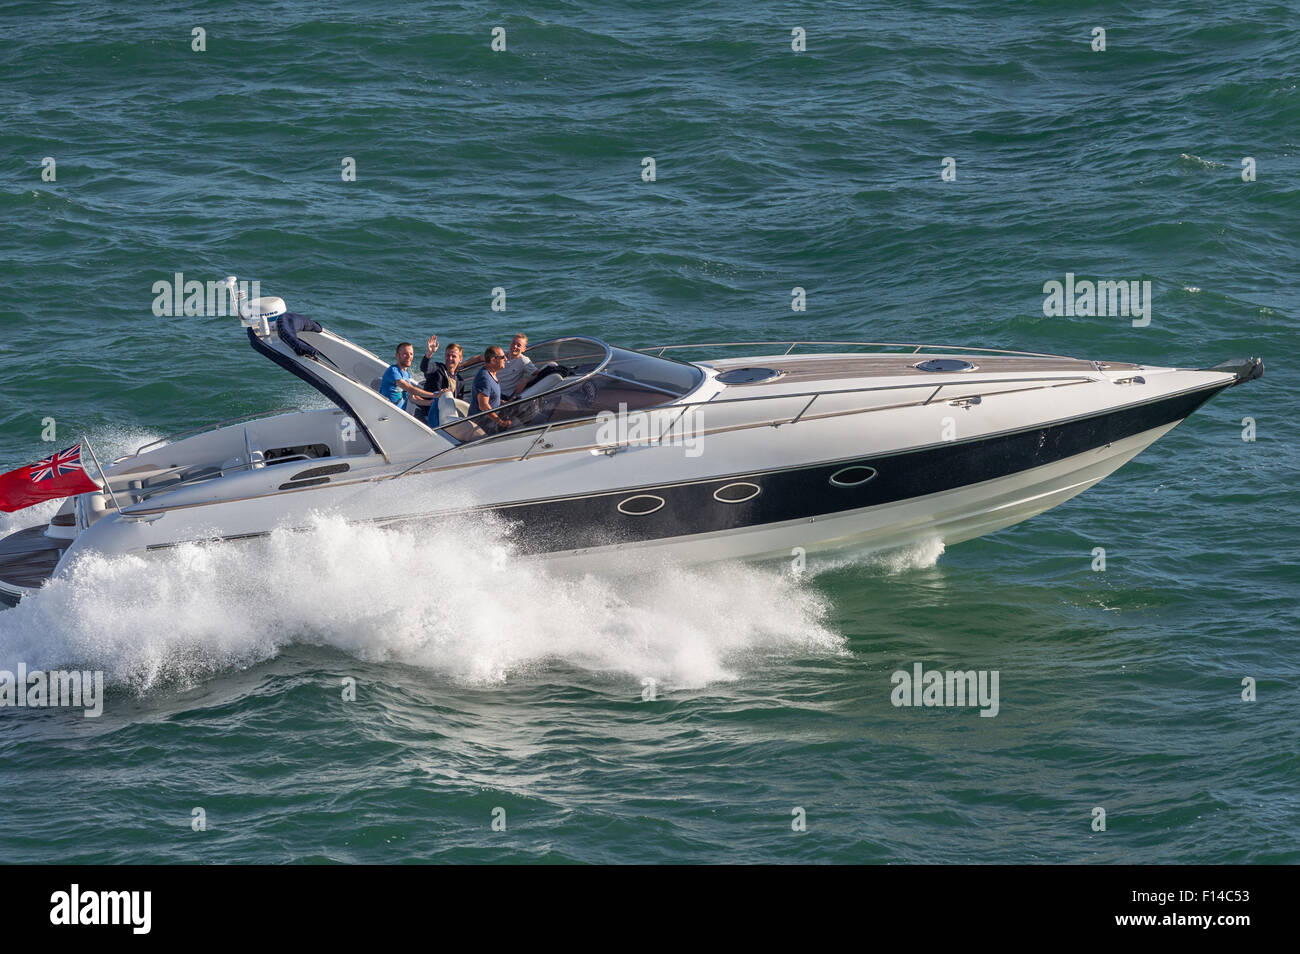 Men enjoying a powerful boat ride in the Solent off Southampton. Stock Photo